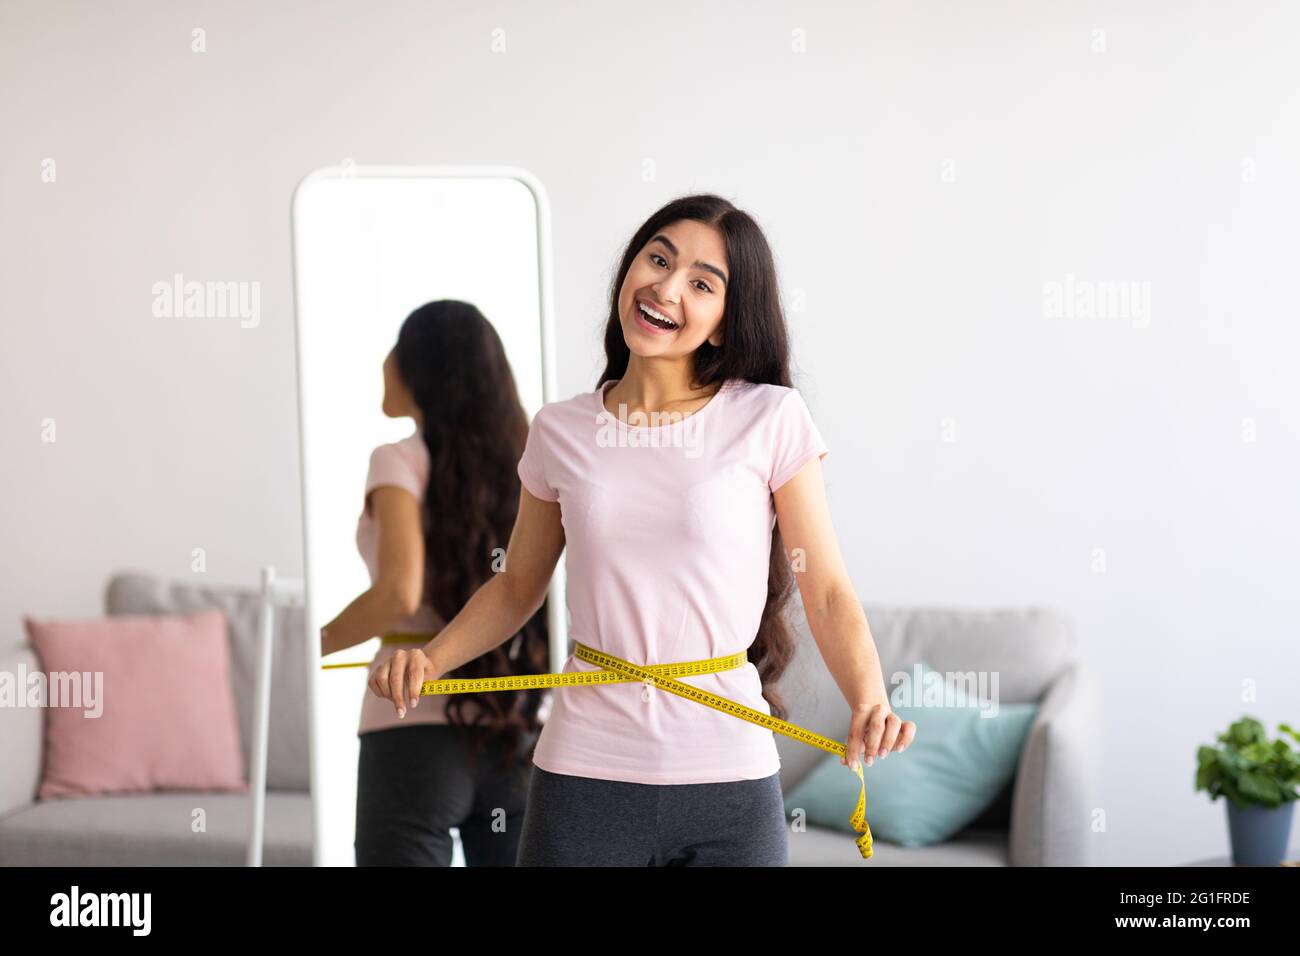 Indian woman measuring her waist with tape in front of mirror, showing results of slimming diet or liposuction at home Stock Photo